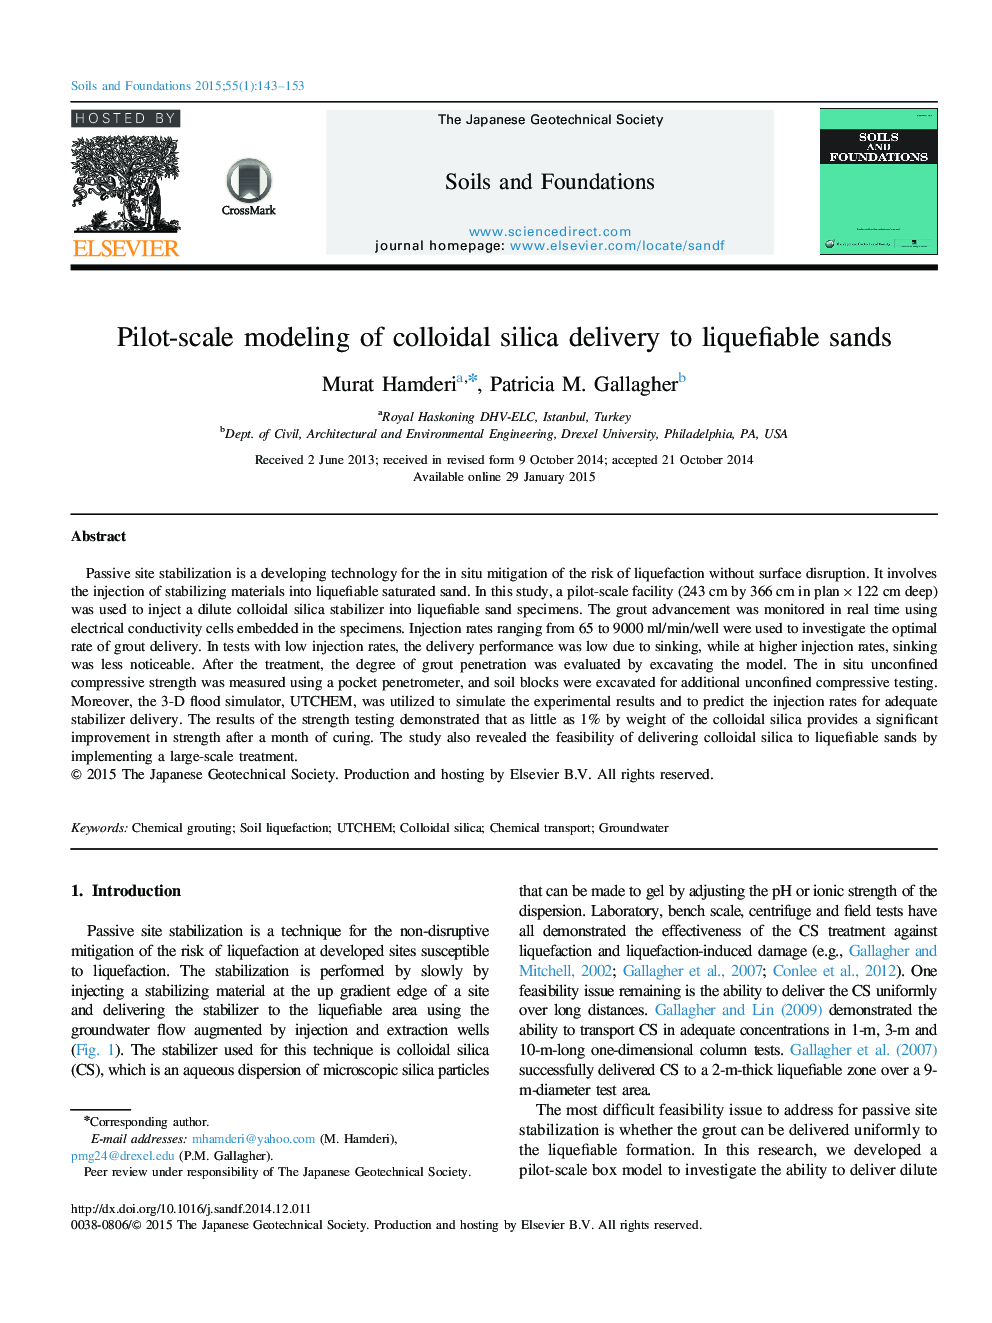 Pilot-scale modeling of colloidal silica delivery to liquefiable sands 